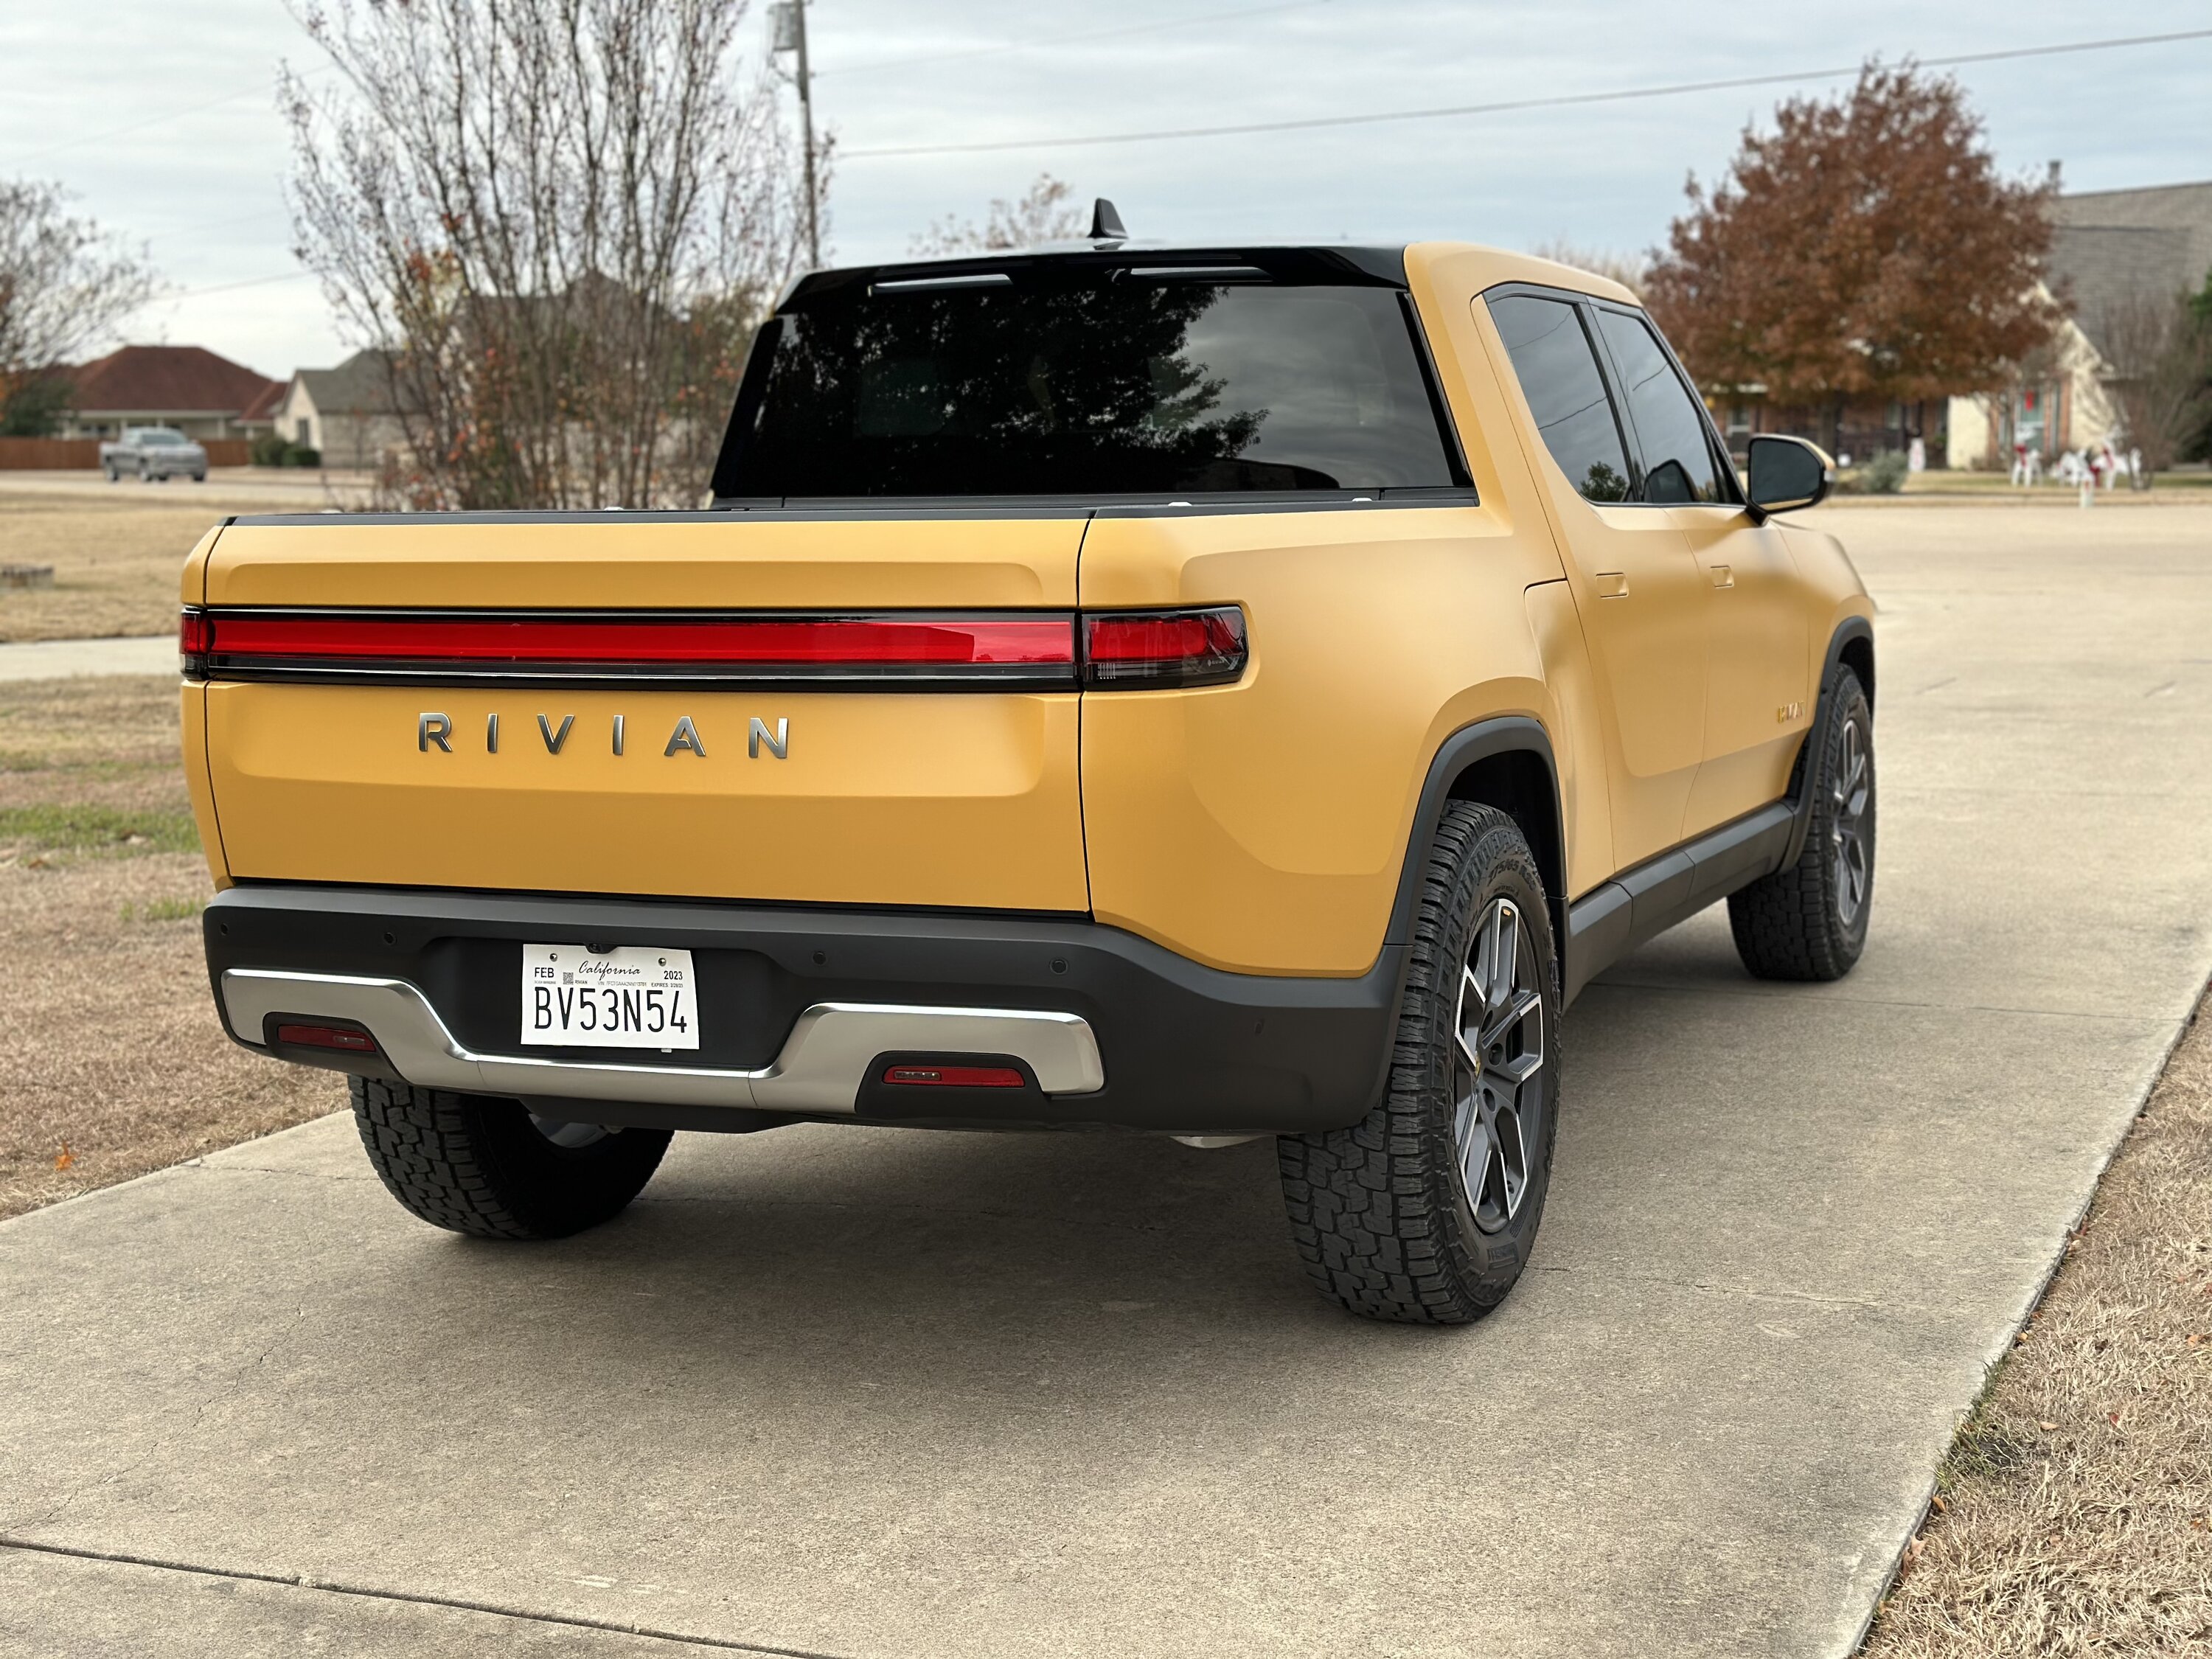 Rivian R1T R1S Stealthy Banana 🍌 -- Compass Yellow R1T w/ Tint and Stealth PPF Wrap 0D574167-AE7A-4F6C-840D-F58DA283DCA1